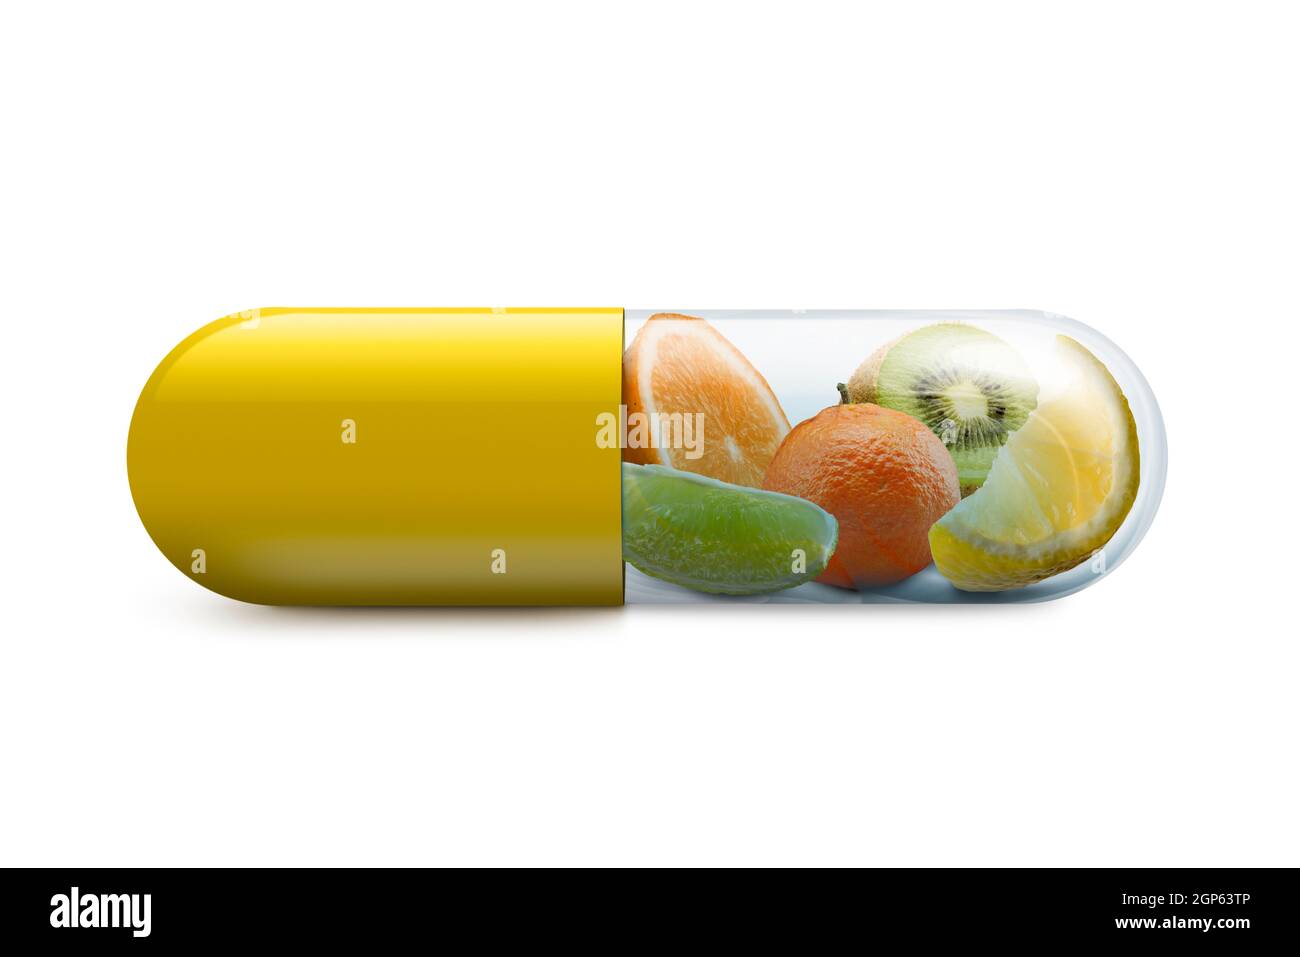 vitamin c pill with citrus fruits inside on with background Stock Photo